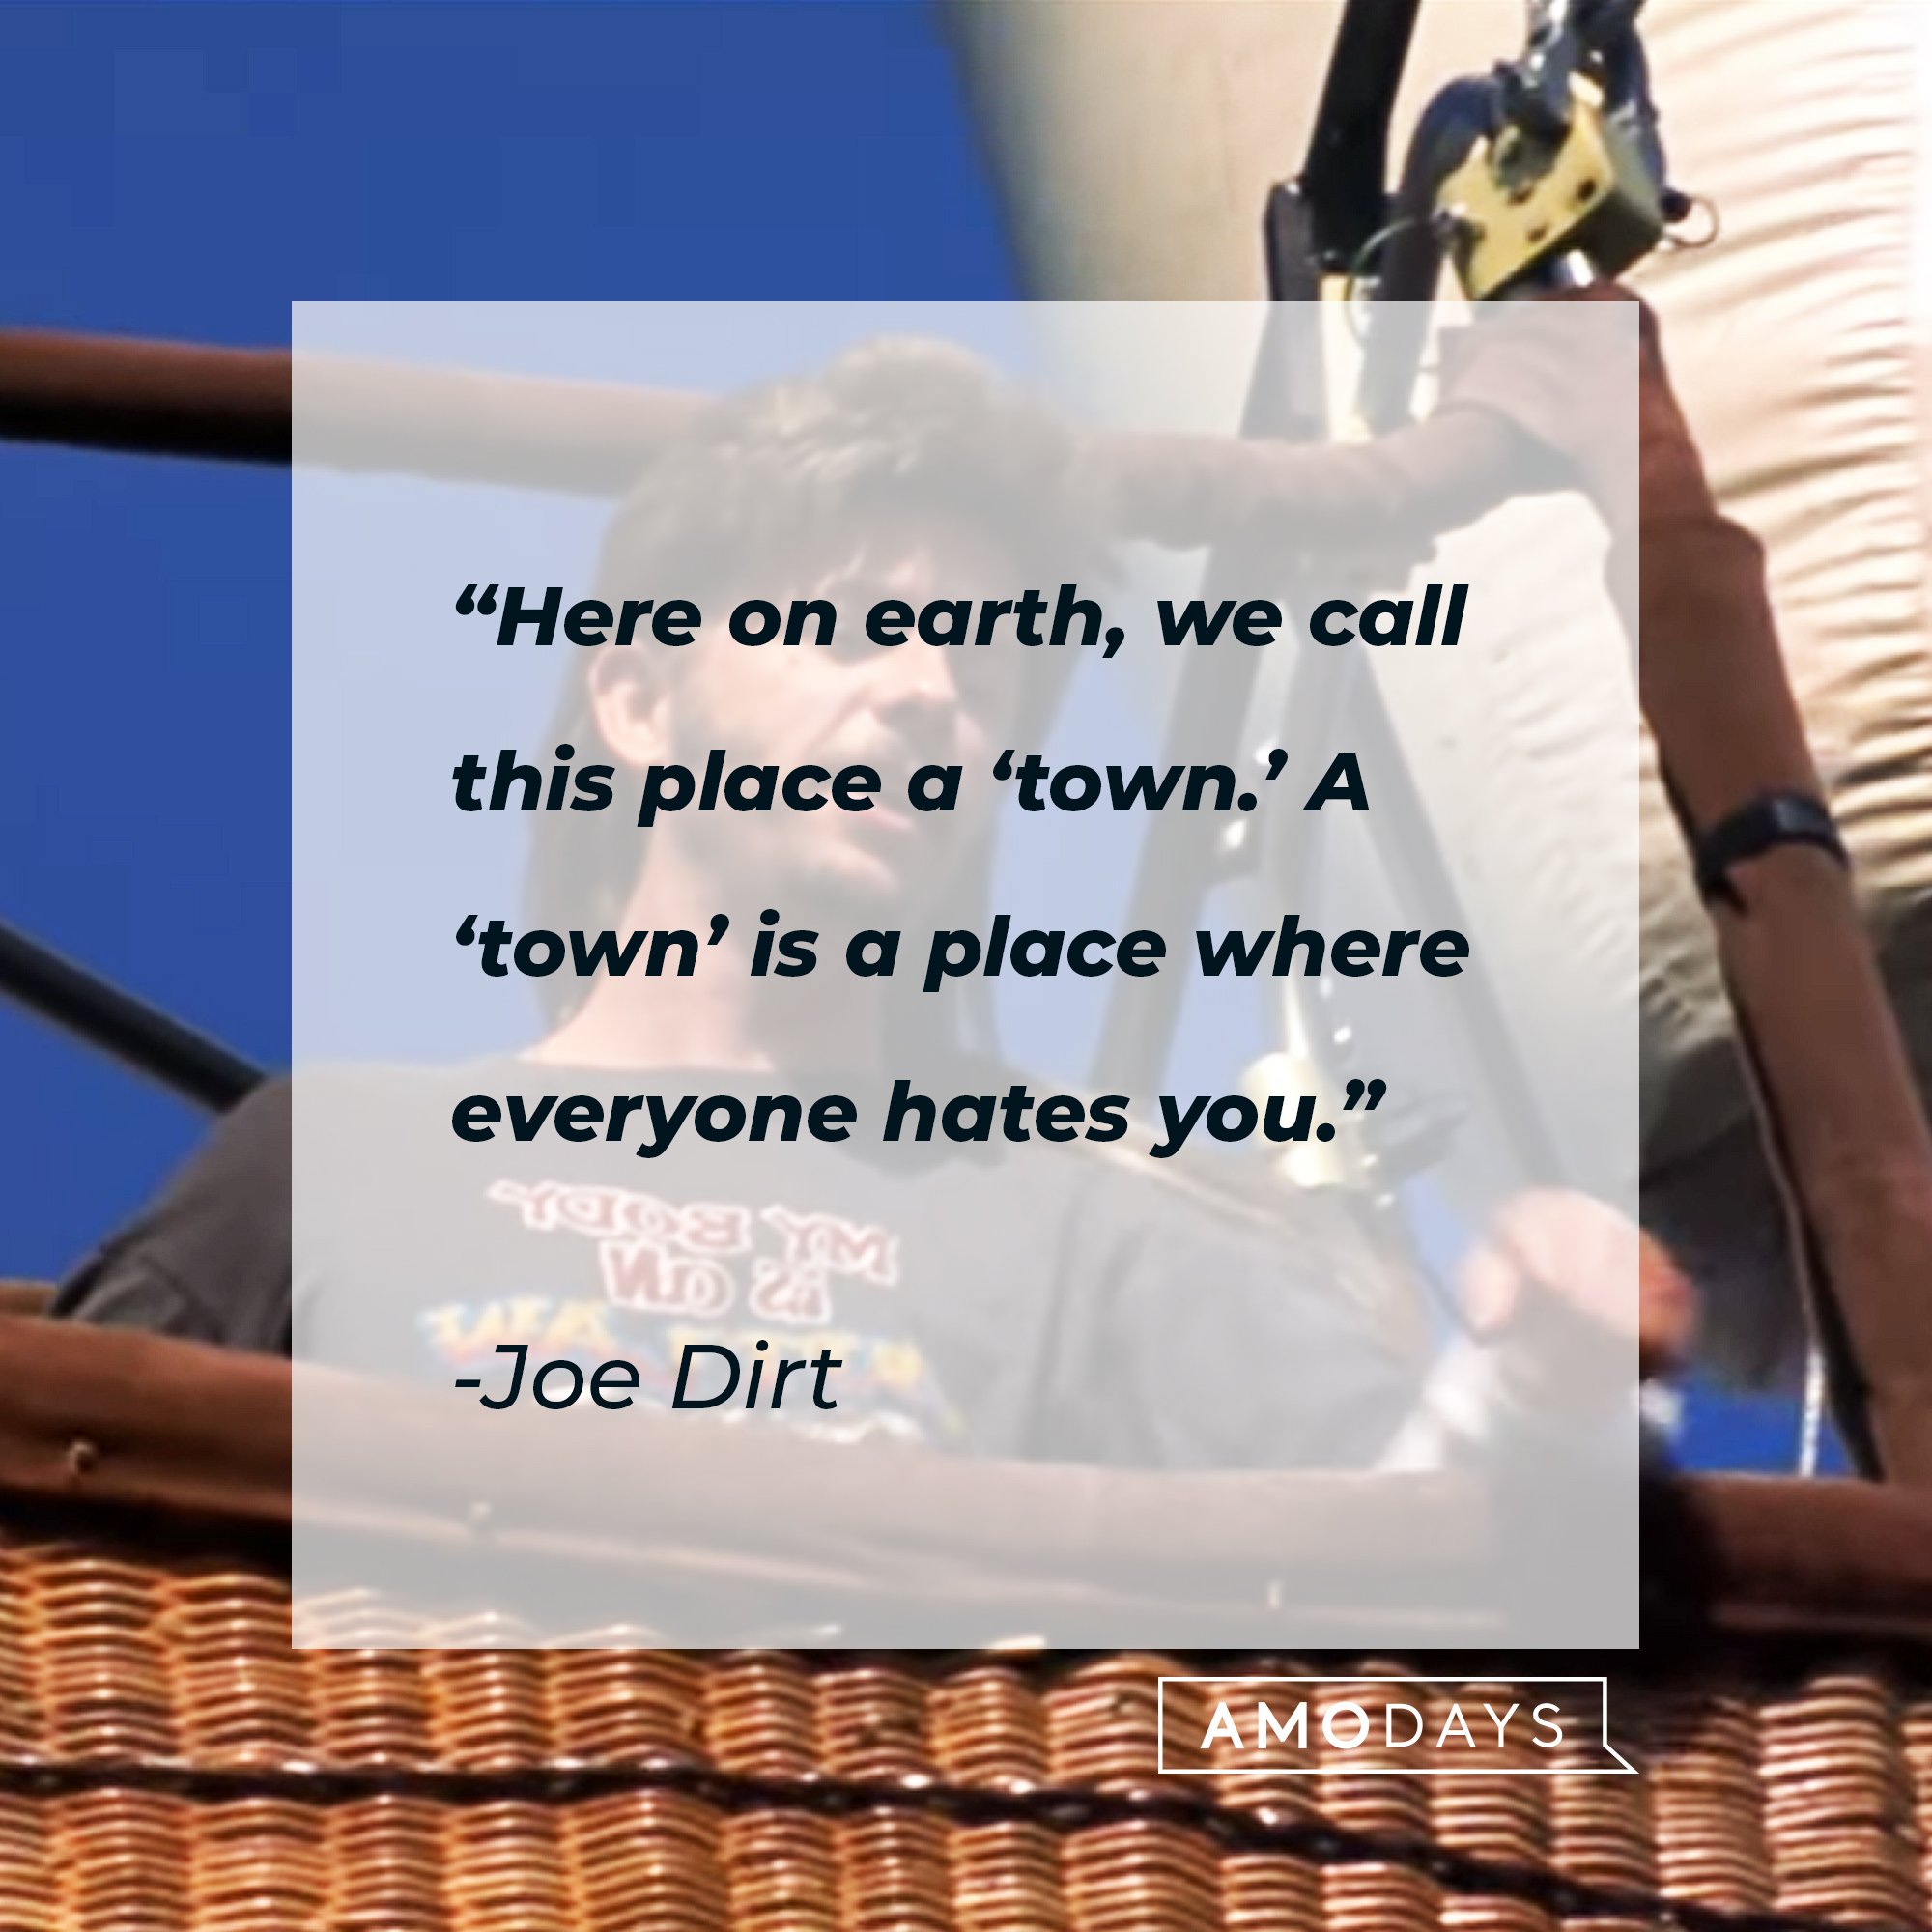 Joe Dirt's quote: “Here on earth, we call this place a ‘town.’ A ‘town’ is a place where everyone hates you.”  | Image: AmoDays